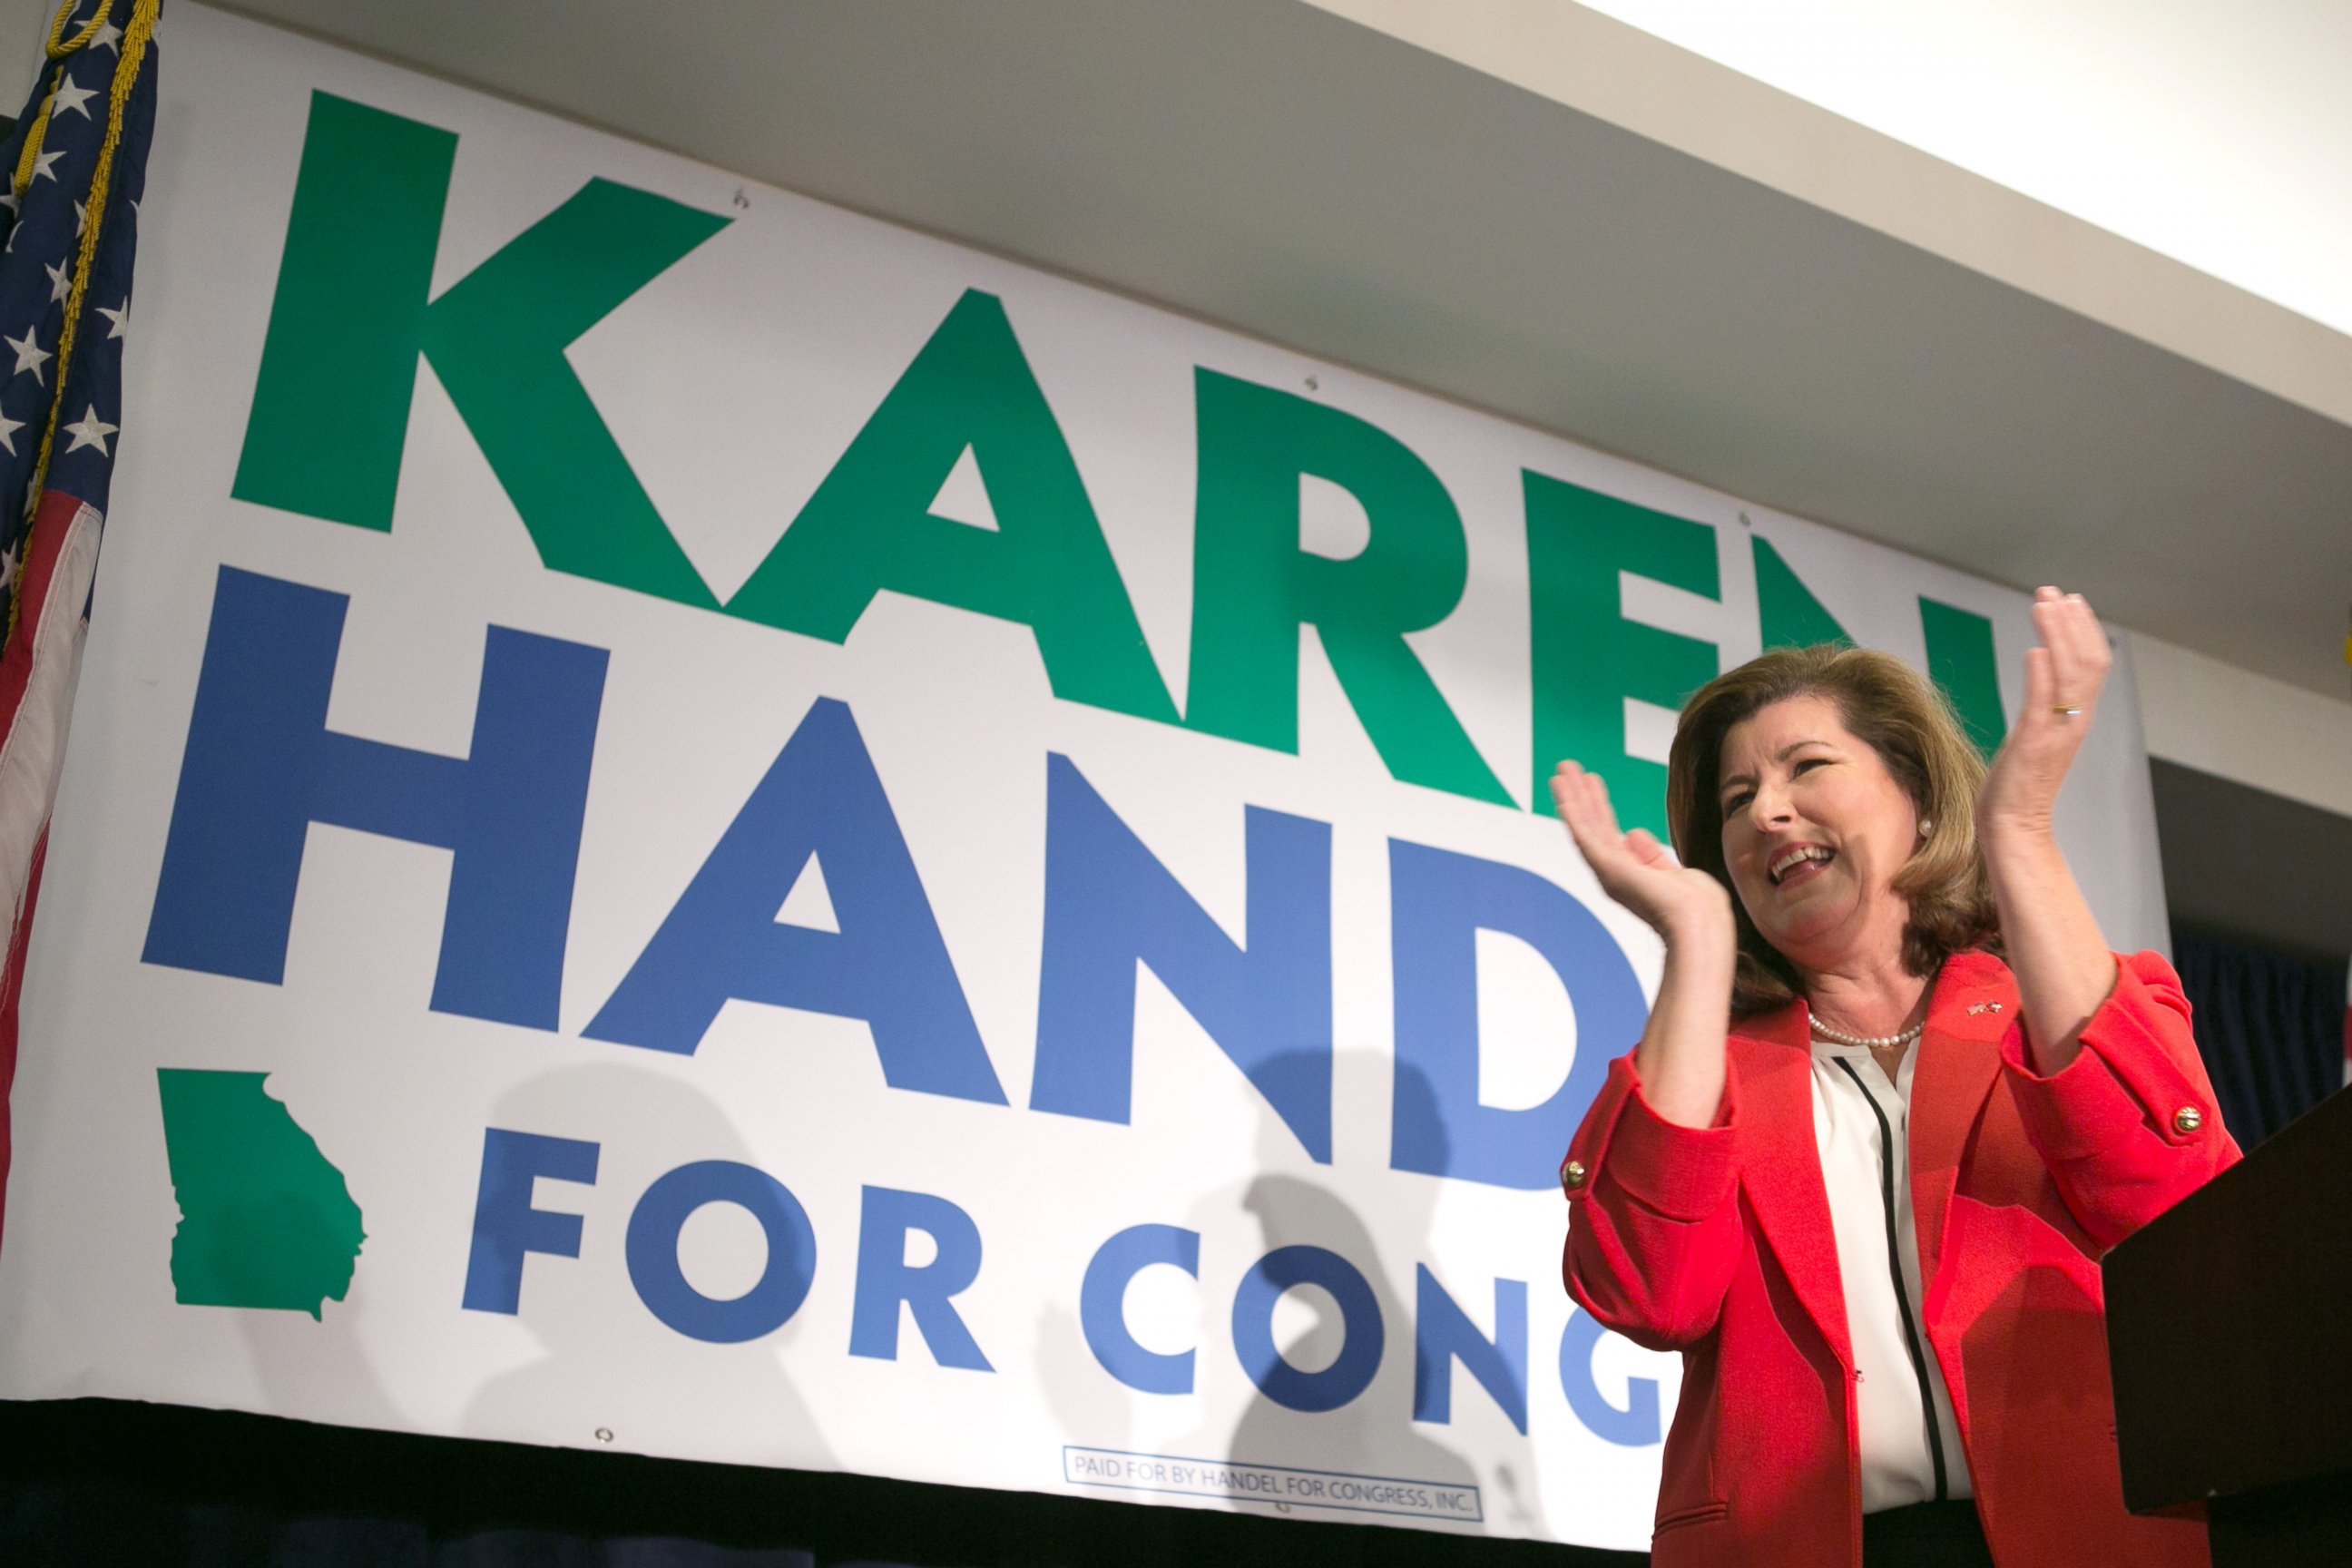 PHOTO: Georgia's 6th Congressional district Republican candidate, Karen Handel, gives a victory speech to supporters gathered at the Hyatt Regency at Villa Christina, on June 20, 2017, in Atlanta.